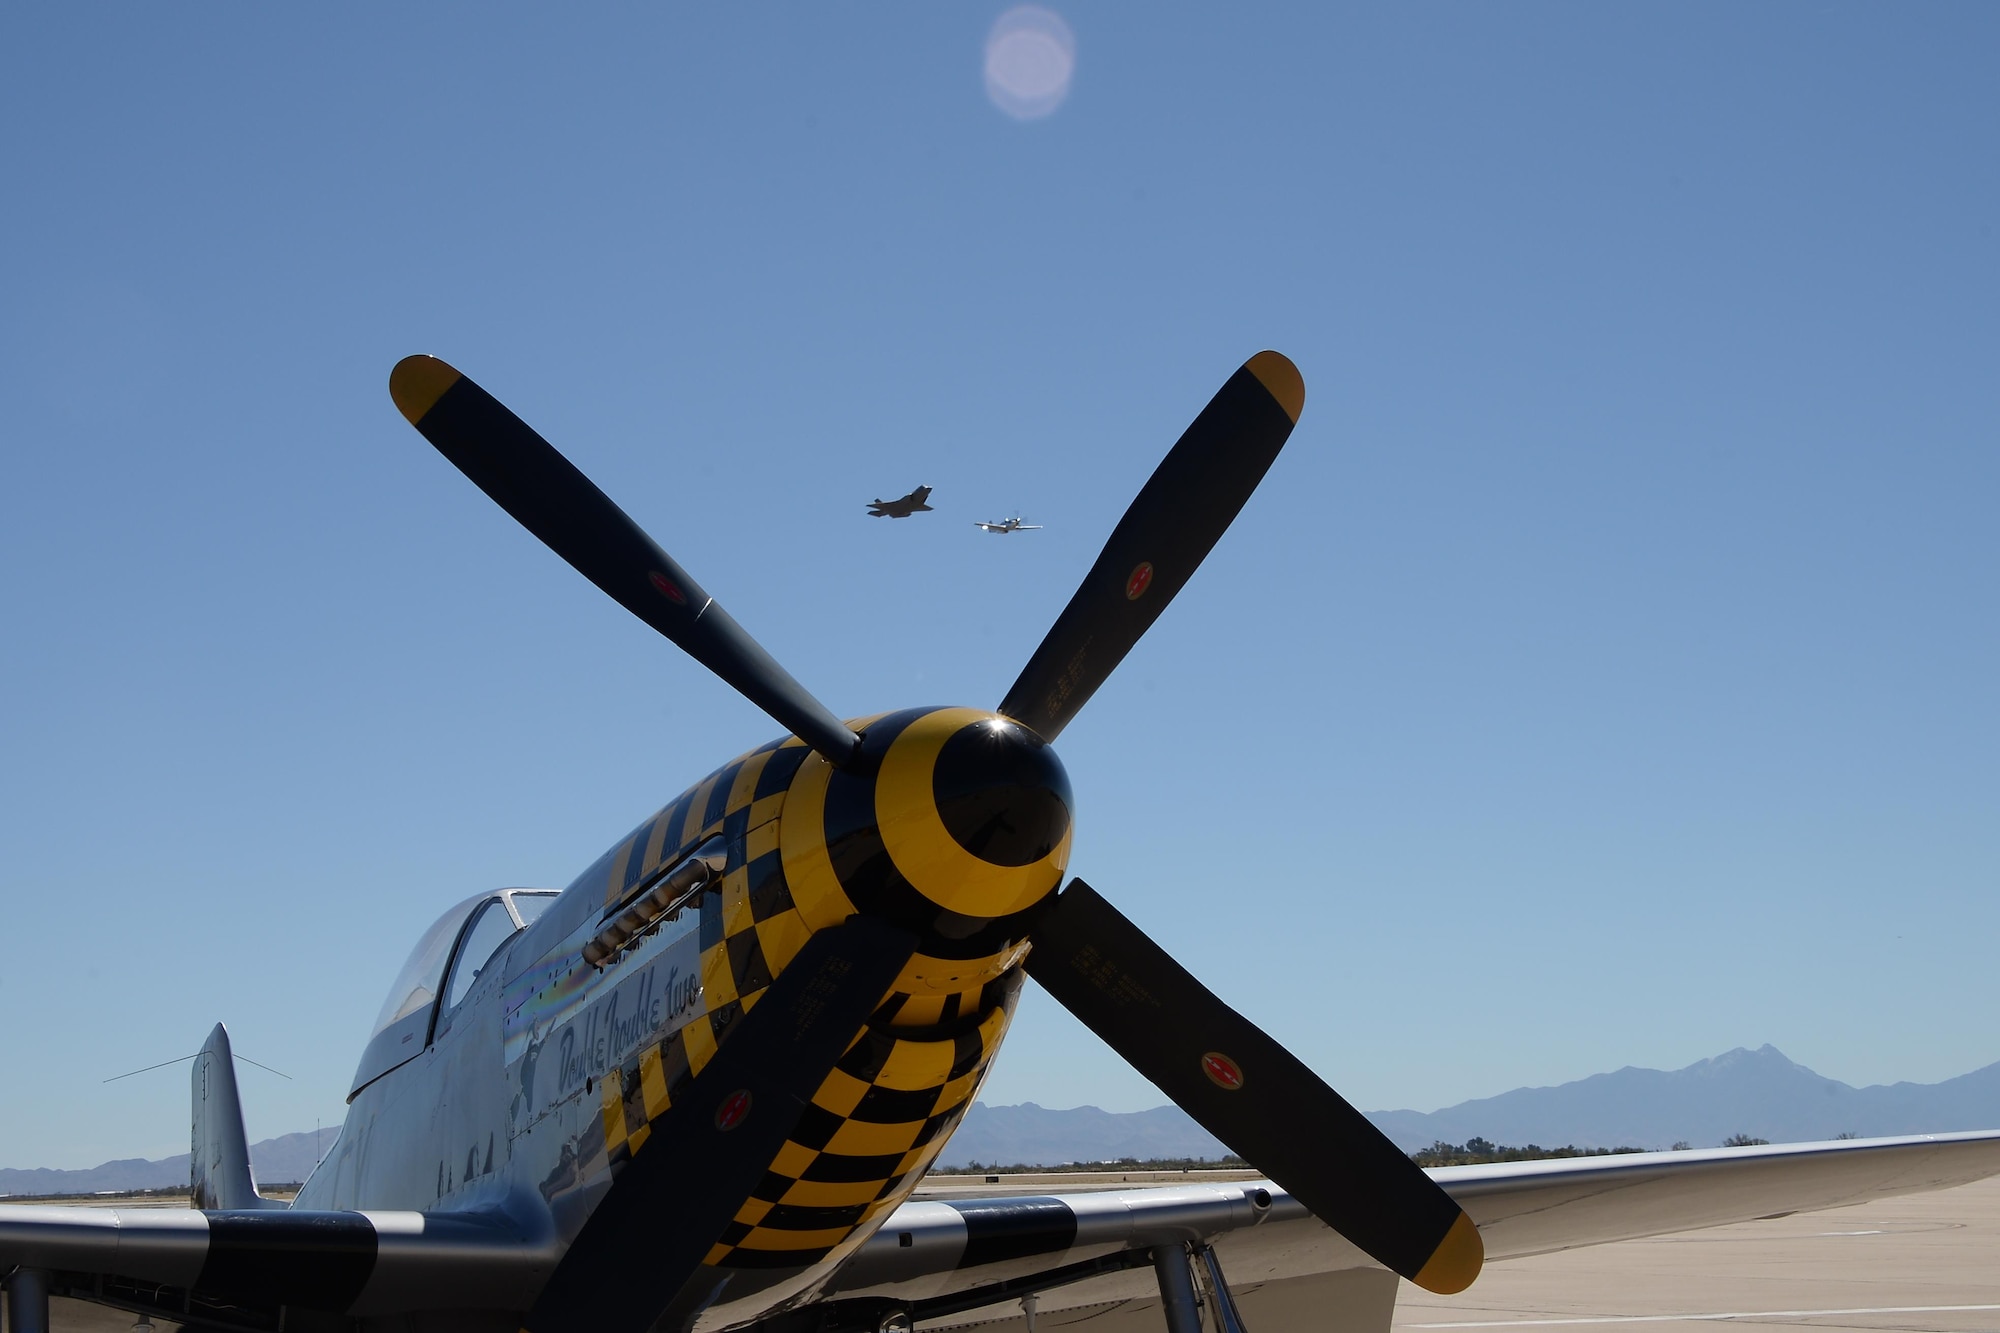 A U.S. Air Force F-35 Lightning II and a P-51 Mustang perform a fly over during the 2017 Heritage Flight Training and Certification Course at Davis-Monthan Air Force Base, Ariz., Feb., 10, 2017. The modern aircraft that participated in this year's HFTCC were the F-35 Lightning II, the F-22 Raptor, F-16 Fighting Falcon and the A-10C Thunderbolt II. The historic aircraft included the P-51 and T-51 Mustangs, the P-40 Warhawk, the P-38 Lightning, the P-47 Thunderbolt, the T-33 Shooting Star and the F-86 Sabre. (U.S. Air Force photo by Senior Airman Ashley N. Steffen)